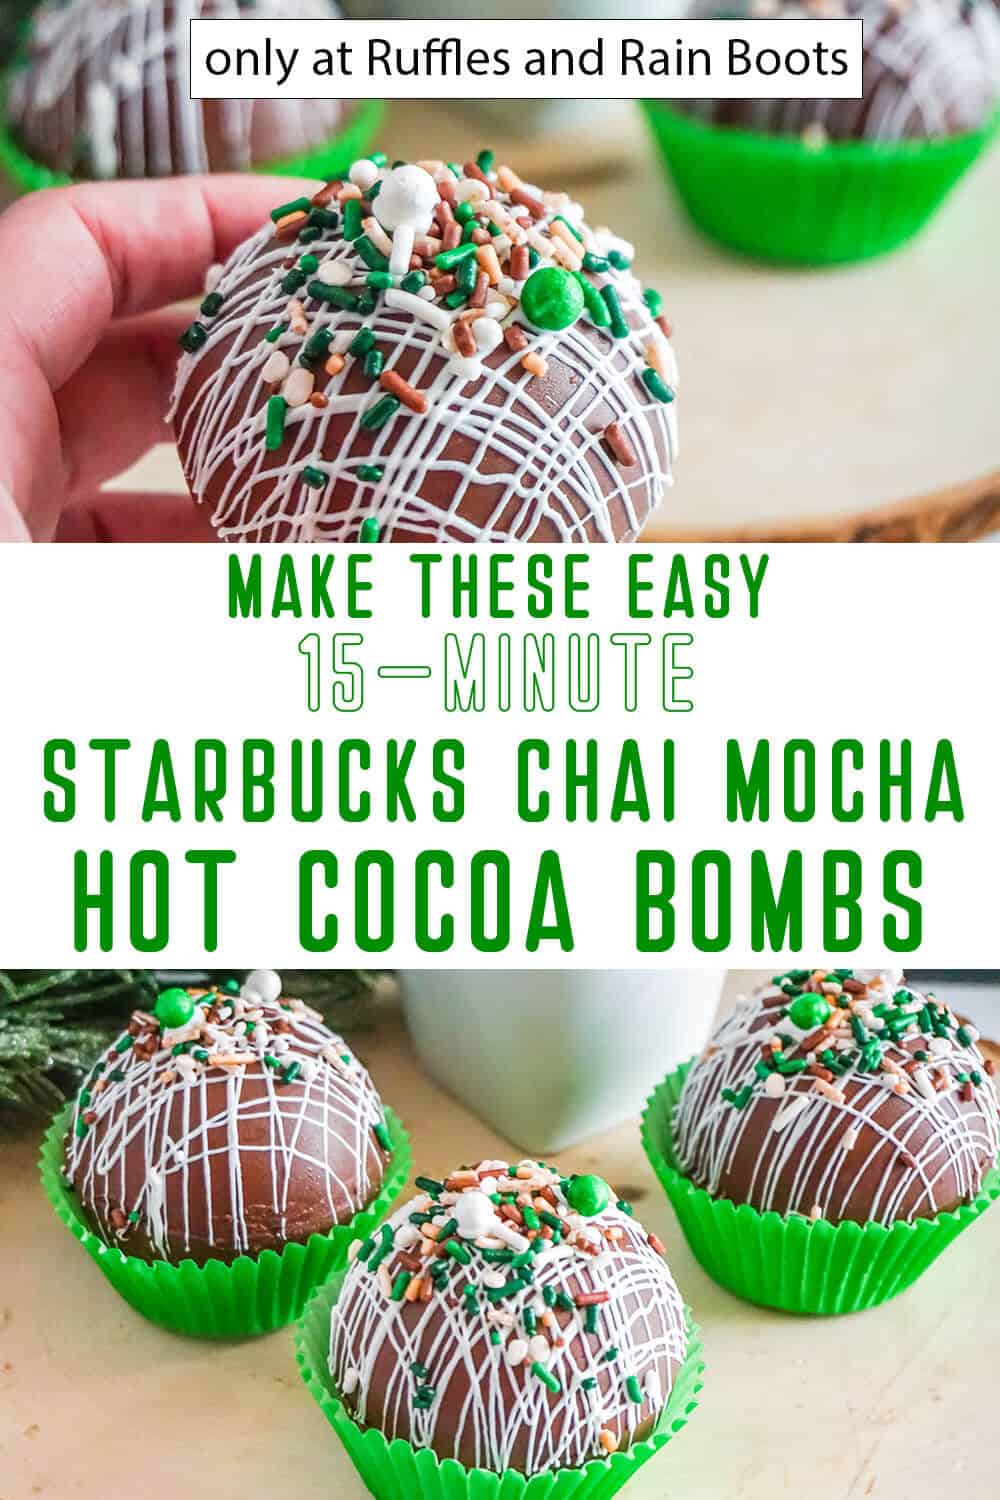 photo collage of tea infused hot cocoa bombs with text which reads make these easy 15-minute starbucks chai mocha hot cocoa bombs